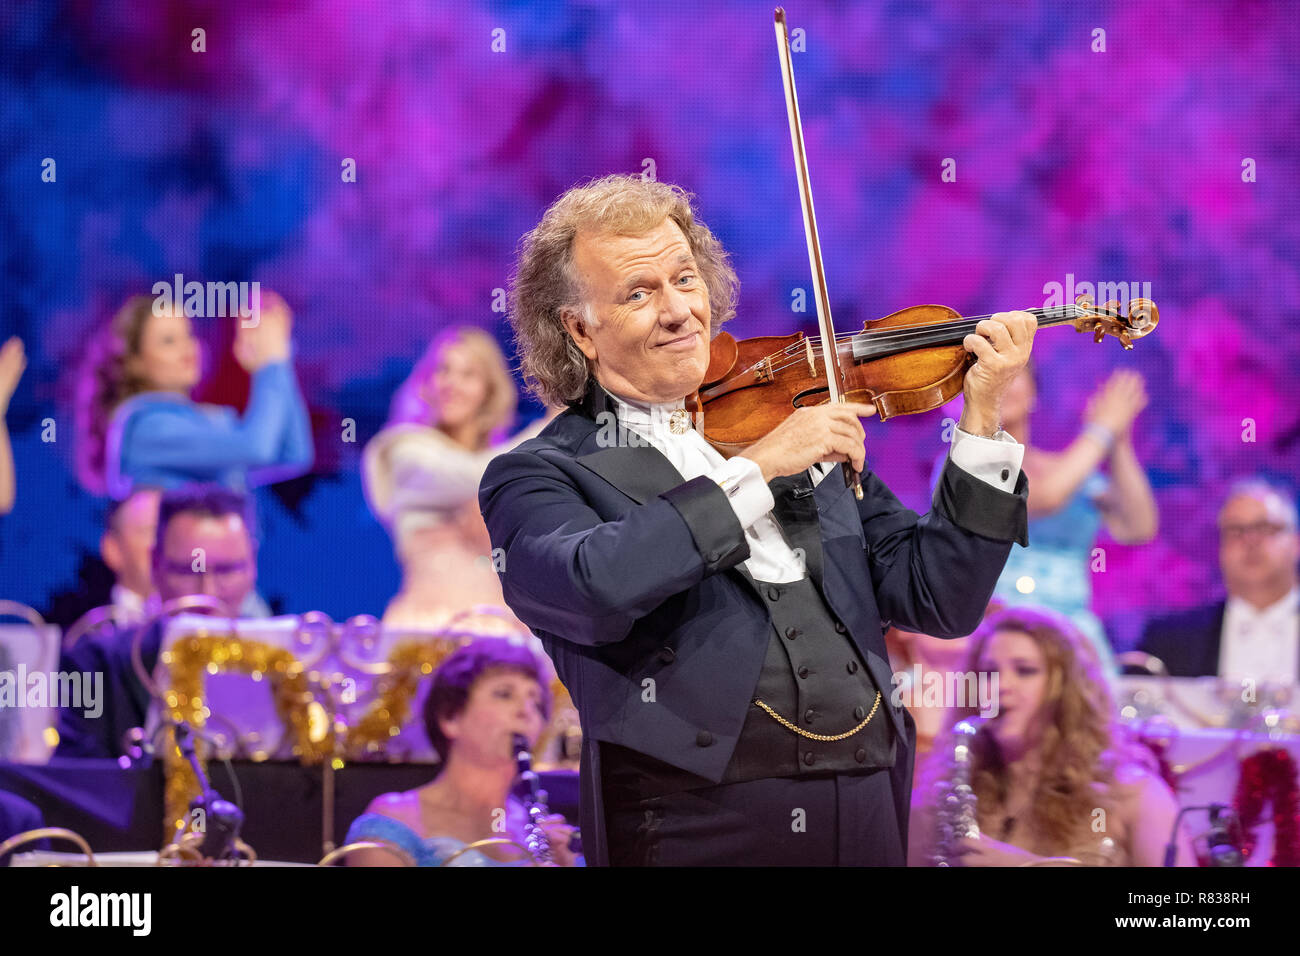 London, England. 12th December 2018, (EXCLUSIVE COVERAGE) André Rieu performs at London‑Wembley ‑ The SSE Arena ,England, Credit: Jason Richardson/Alamy Live News Stock Photo